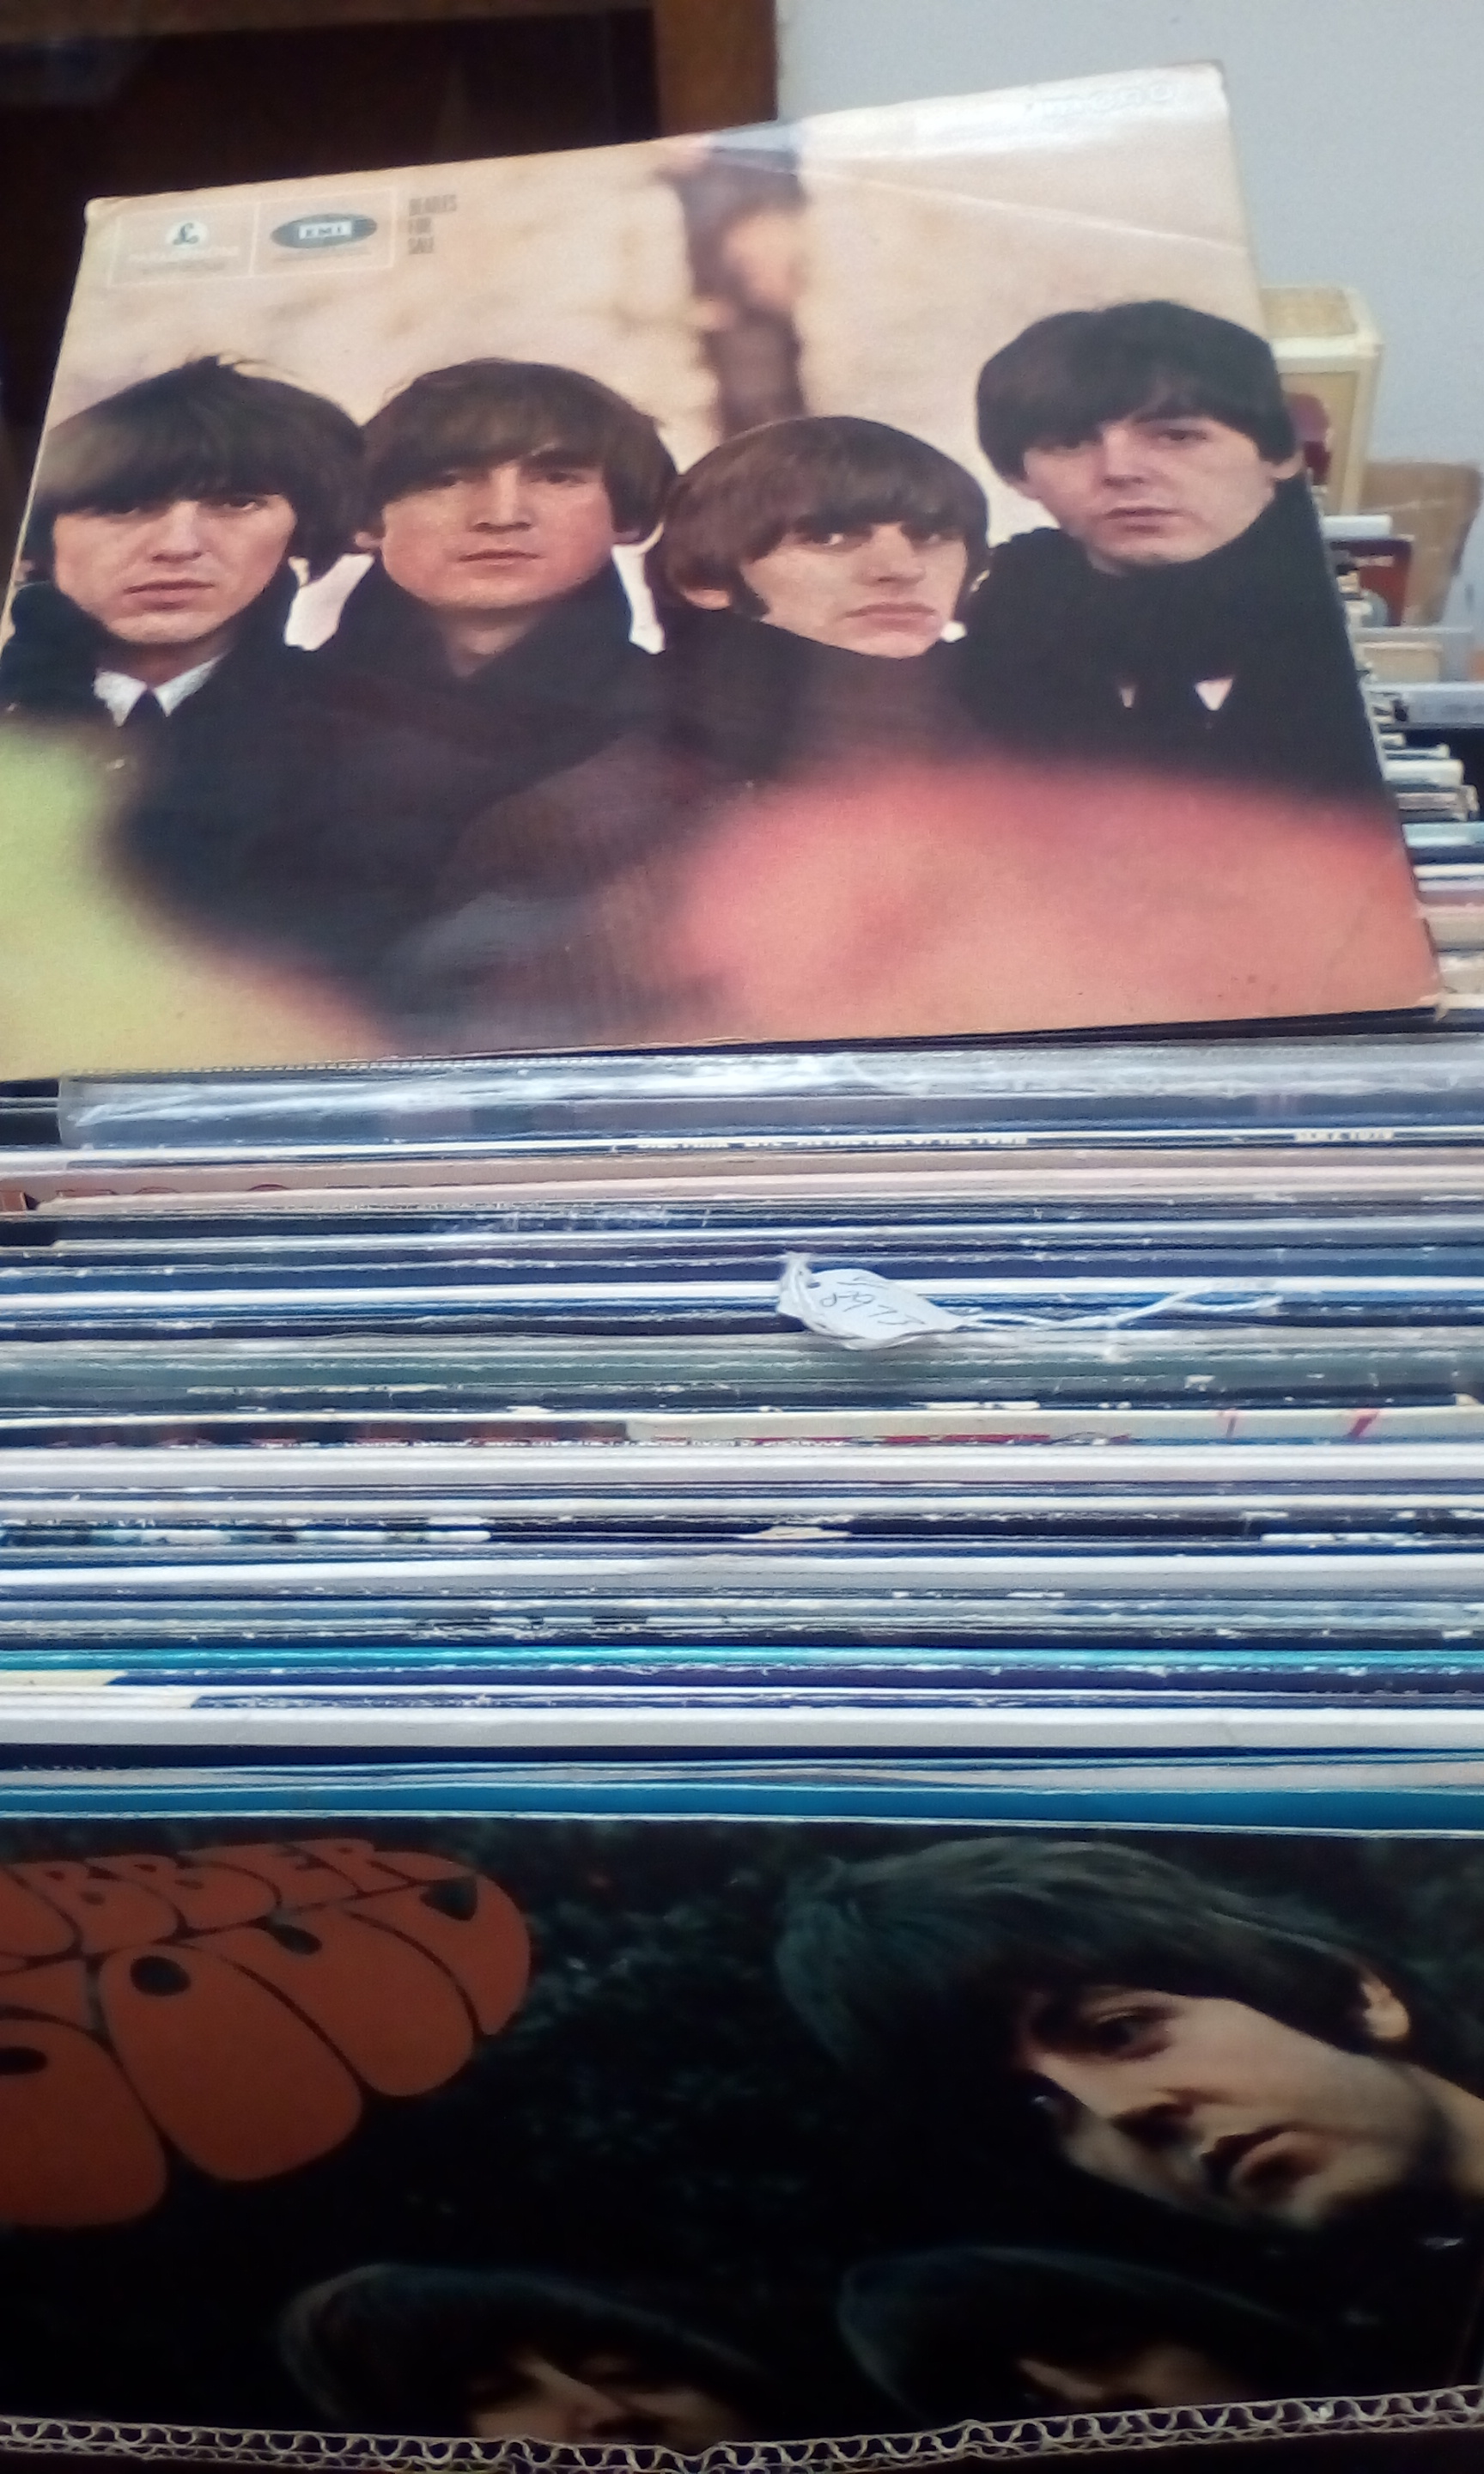 Good colection of 12" LPs to include three Beatles